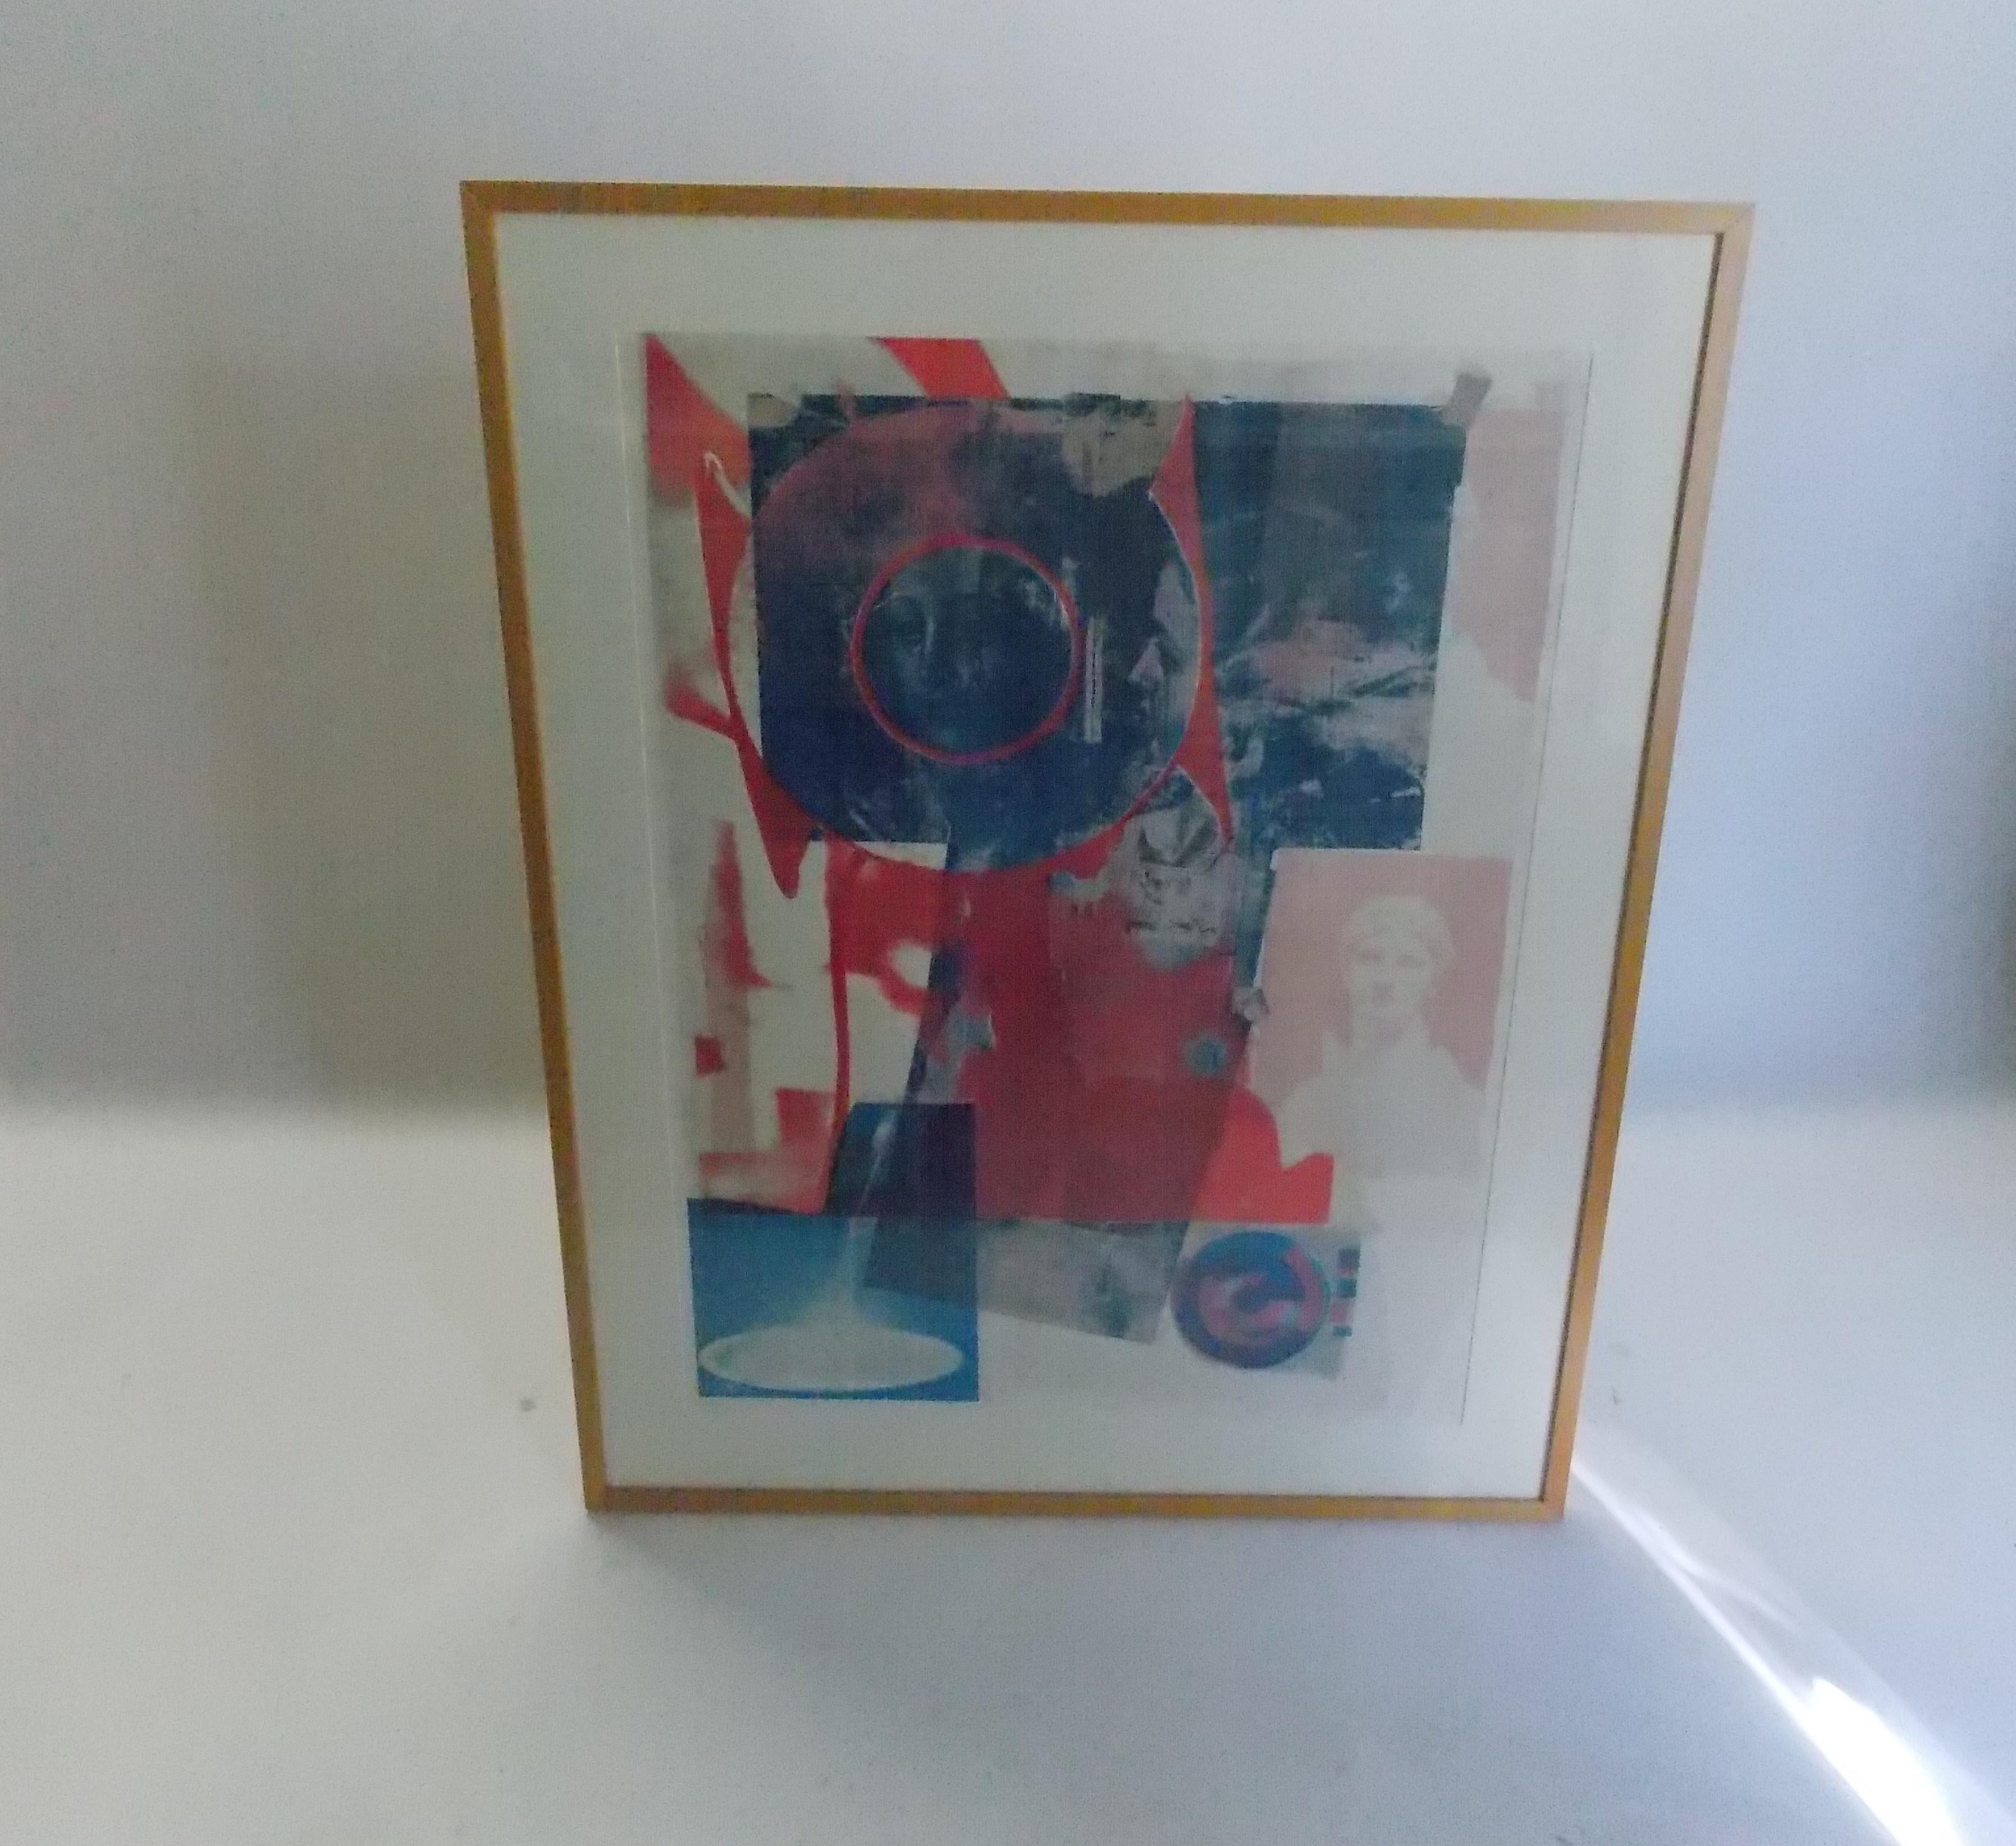 Rauschenberg color lithograph for Gemini, Gel.
Signed and editioned
Print size: 33 3/4